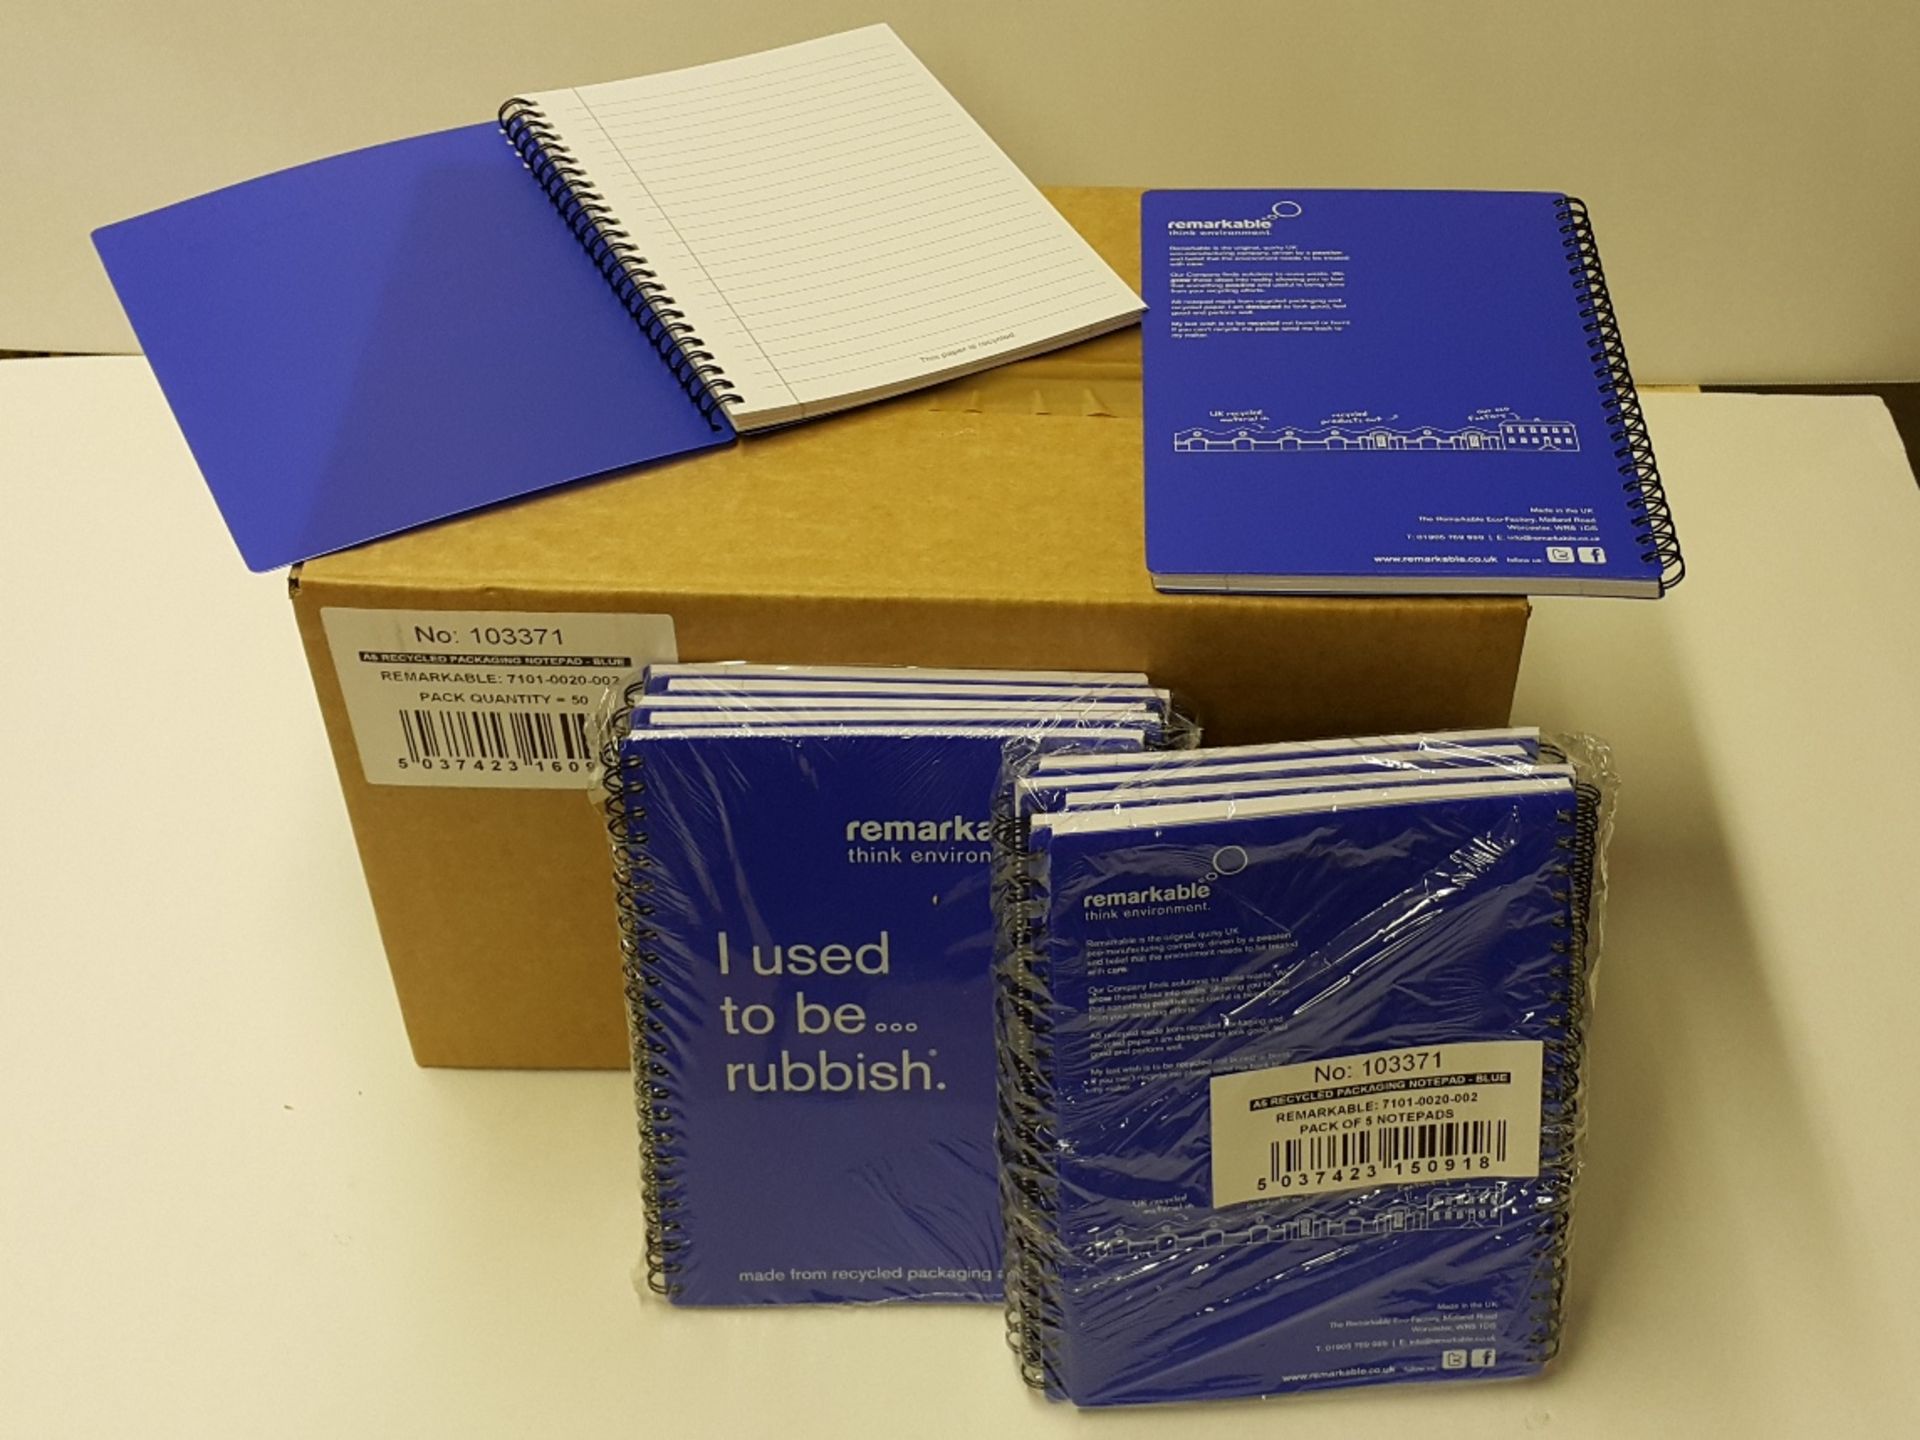 50 x Remarkable A5 Blue NOTEBOOKS Made from uk recycled packaging. (10 packs of 5) New & Unused